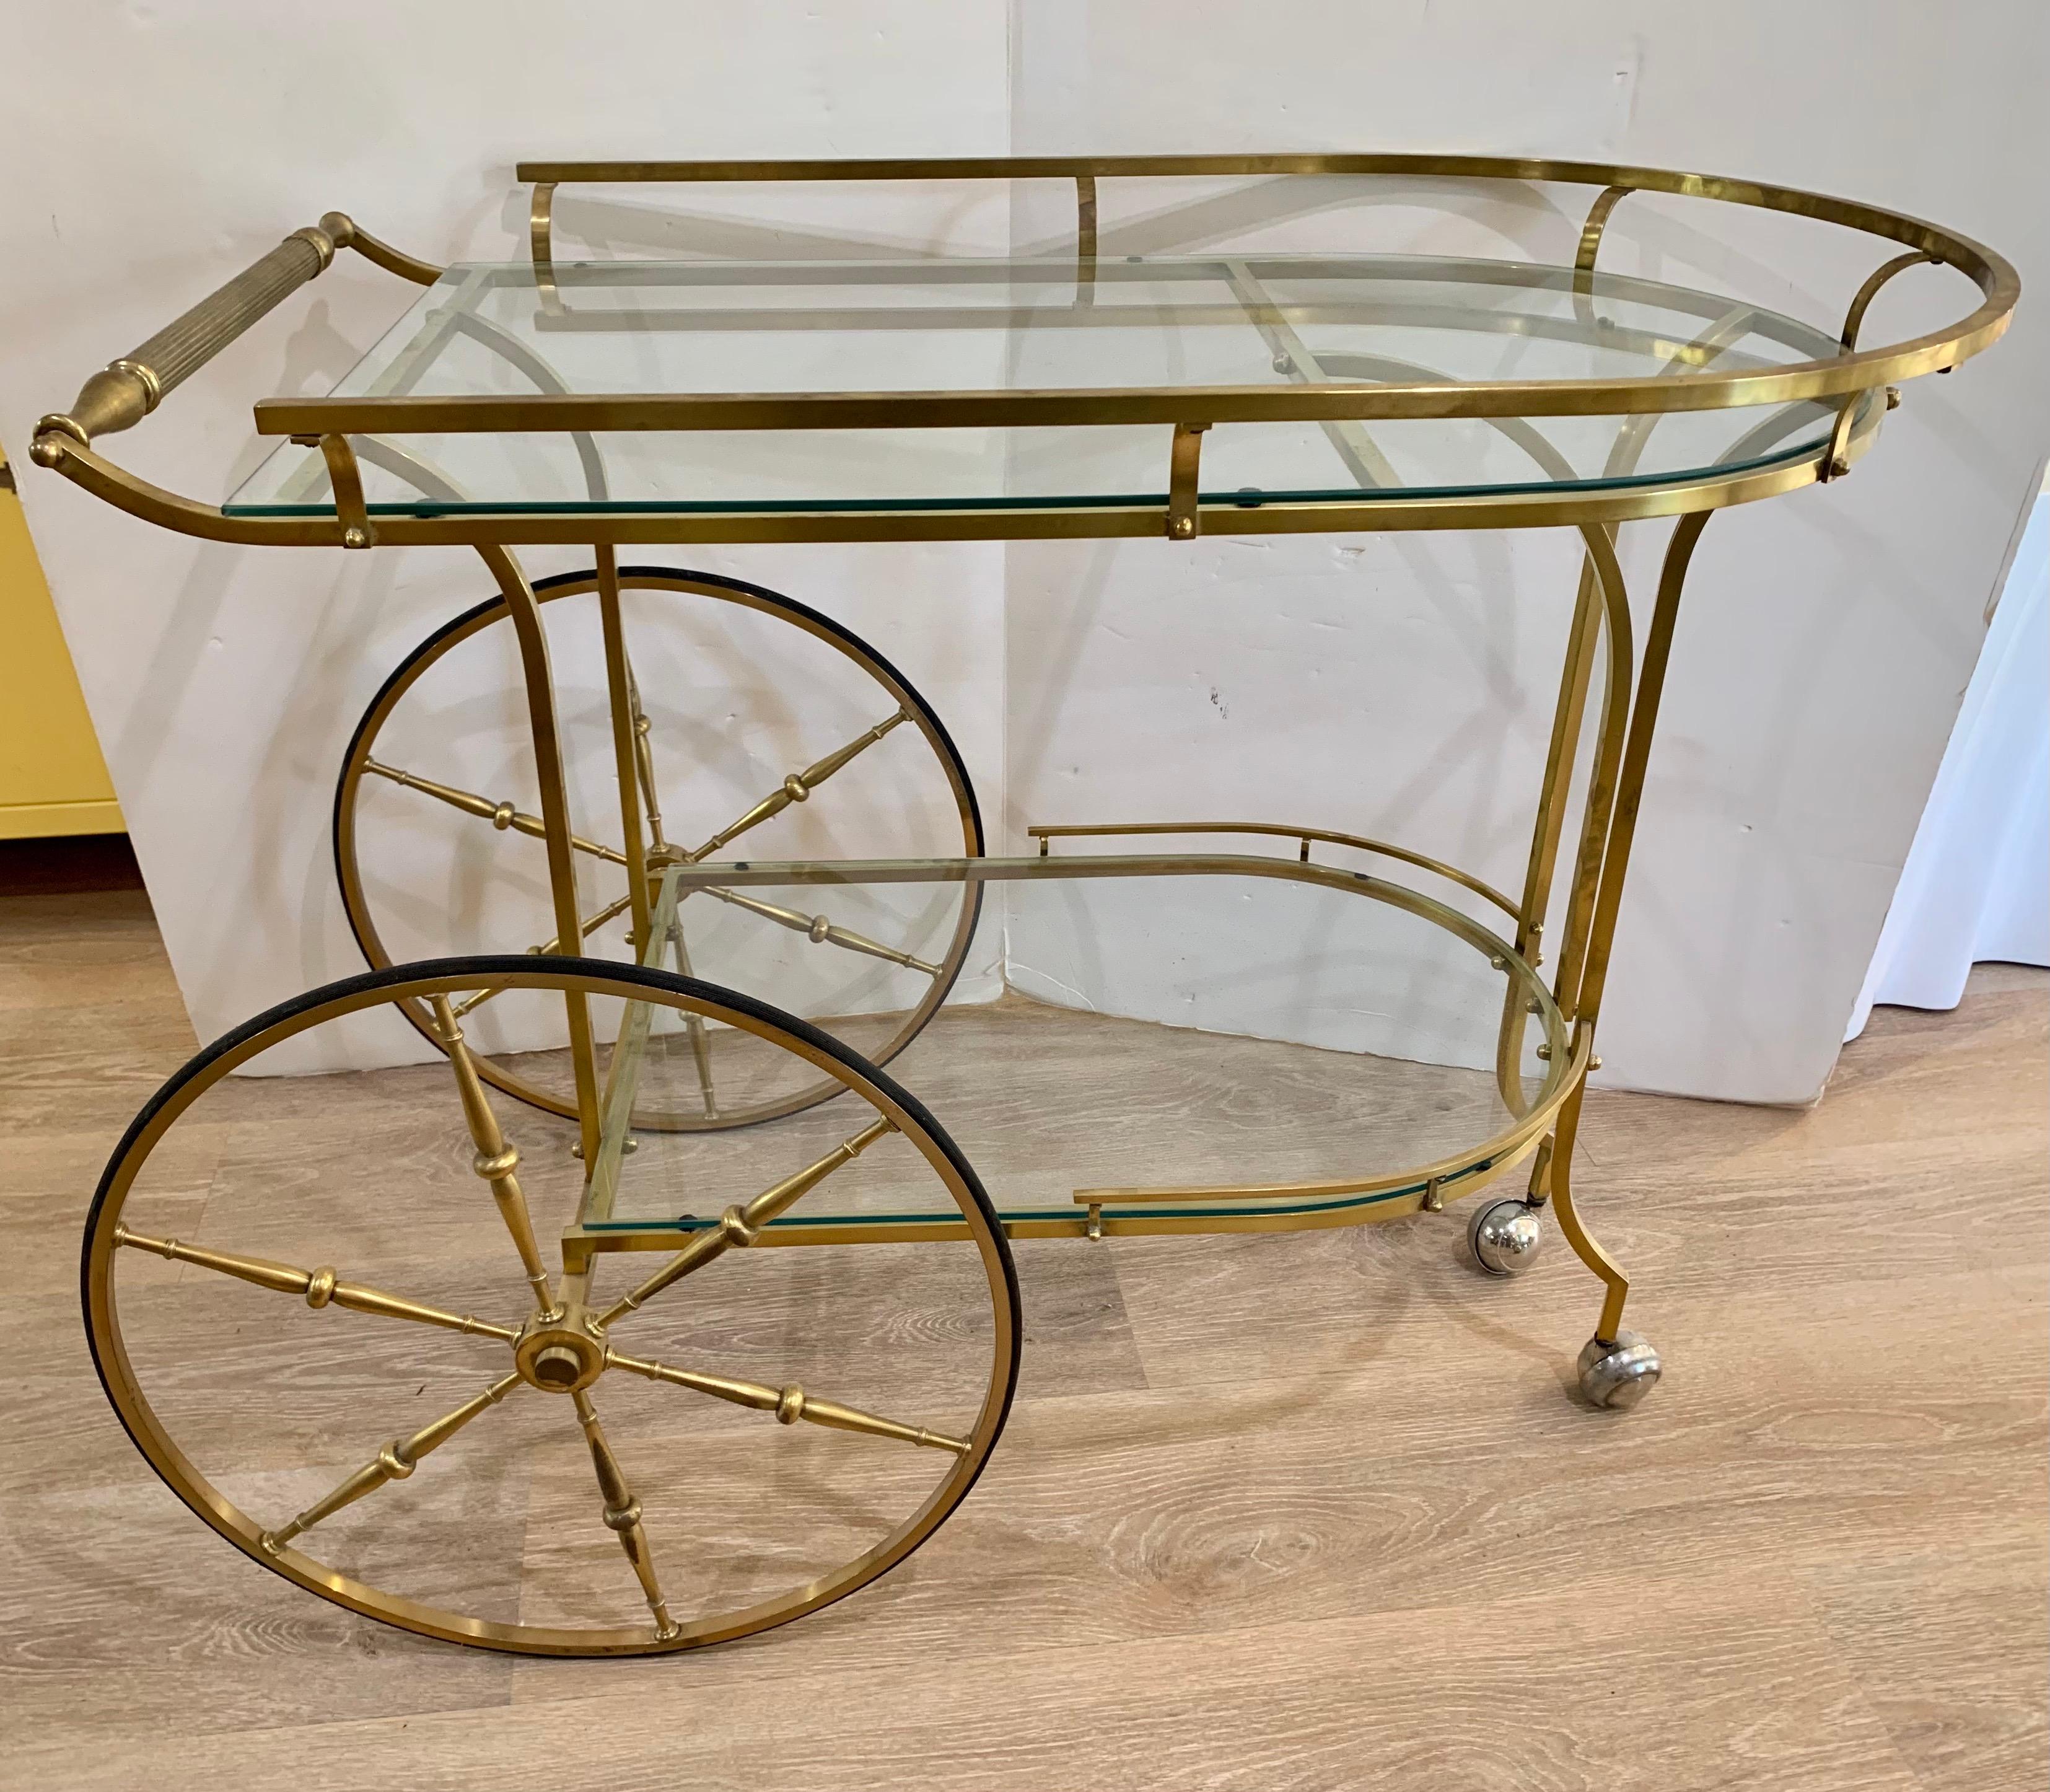 Iconic two-tier mid-century modern brass and glass bar cart with coveted large rear wheels and railing at top tier. Spectacular in every way! Now, more than ever, home is where the heart is.